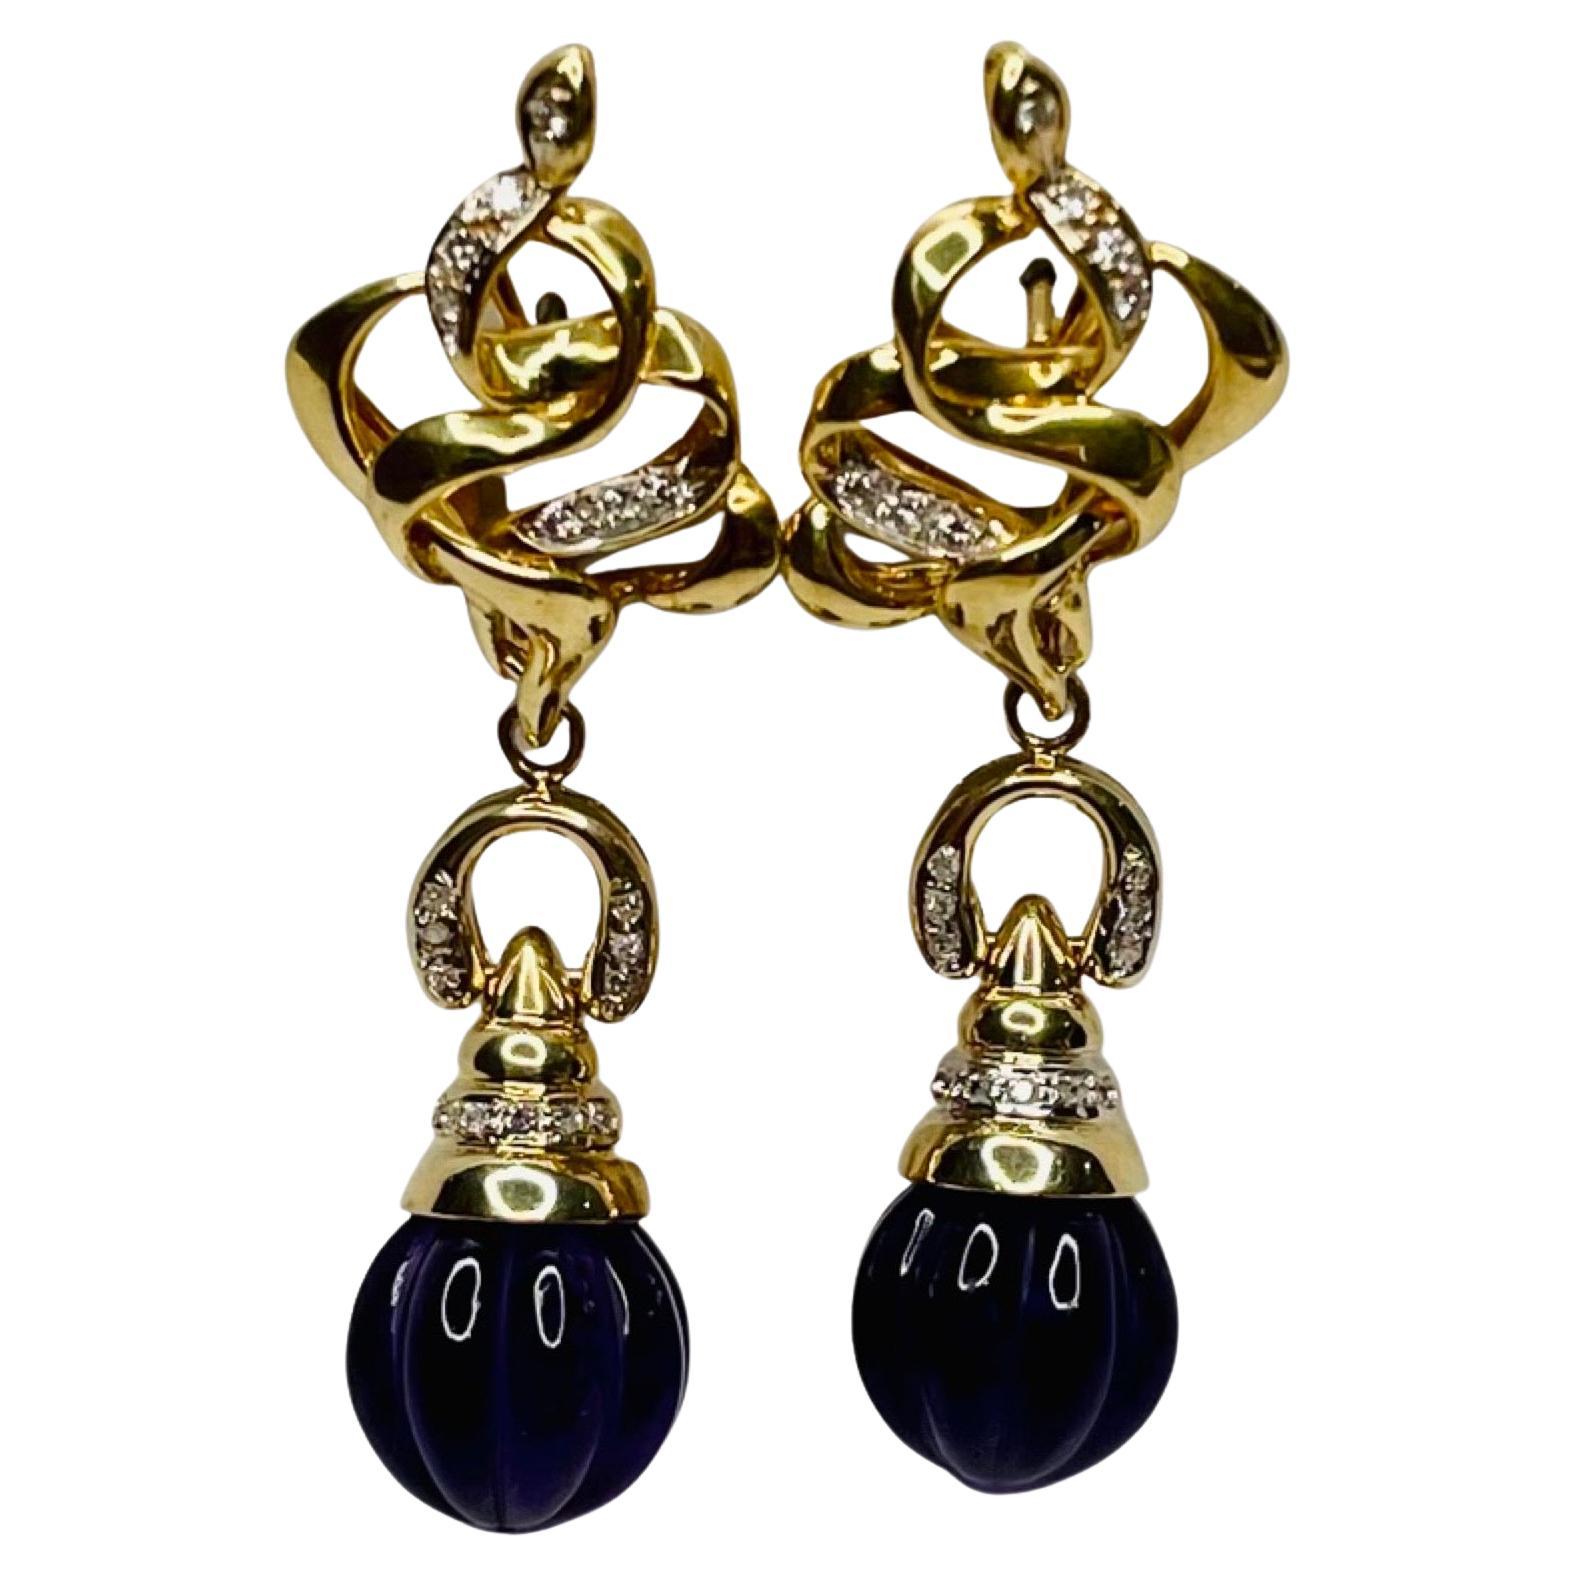 Kian 14K & 18K Yellow Gold Amethyst and Diamond Earrings. There are 2-11.5 mm carved amethyst balls with 14KY gold caps. There are 5 single cut diamonds, bead set on each cap and 6 on each upside down U-shape above the ball. There are 22 single cut